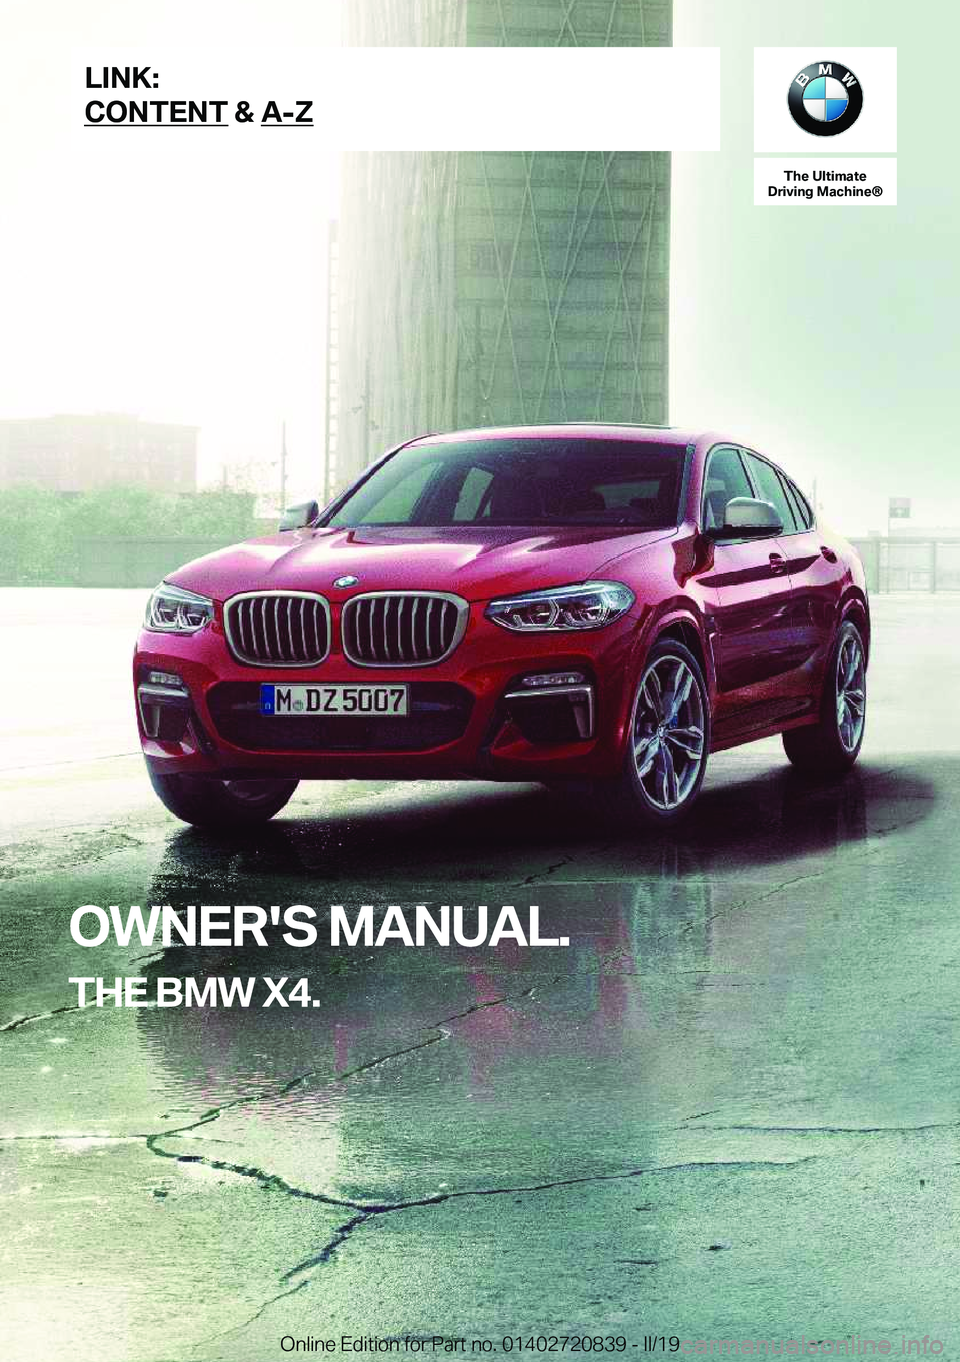 BMW X4 2019  Owners Manual �T�h�e��U�l�t�i�m�a�t�e
�D�r�i�v�i�n�g��M�a�c�h�i�n�e�n
�O�W�N�E�R�'�S��M�A�N�U�A�L�.
�T�H�E��B�M�W��X�4�.�L�I�N�K�:
�C�O�N�T�E�N�T��&��A�-�Z�O�n�l�i�n�e��E�d�i�t�i�o�n��f�o�r��P�a�r�t�